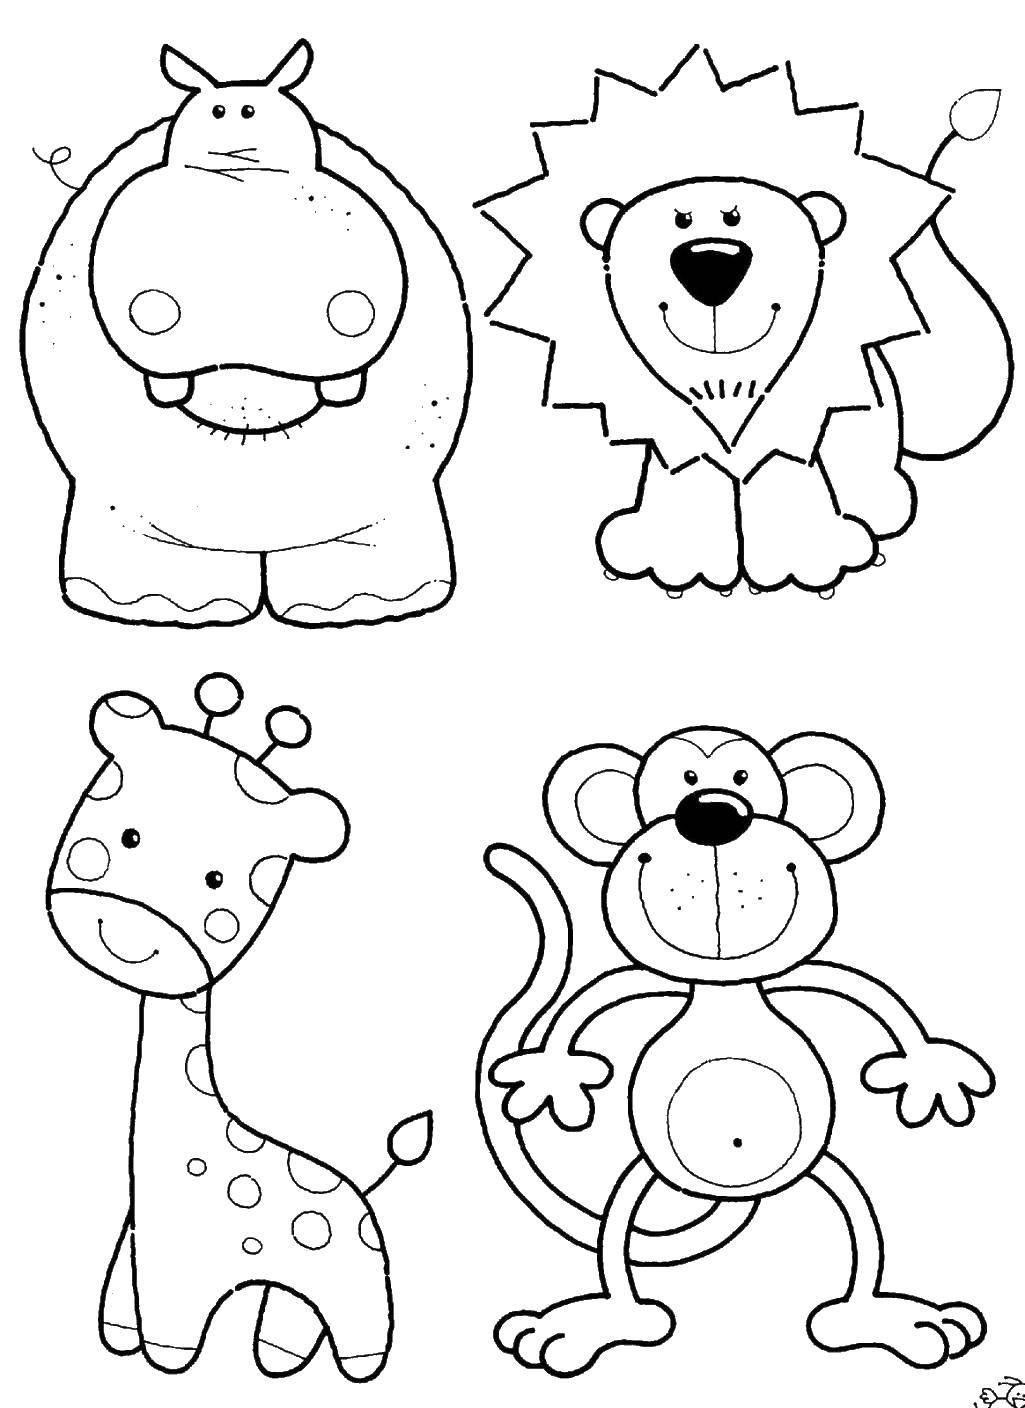 Coloring Different animals. Category Wild animals. Tags:  Hippo, lion, giraffe.